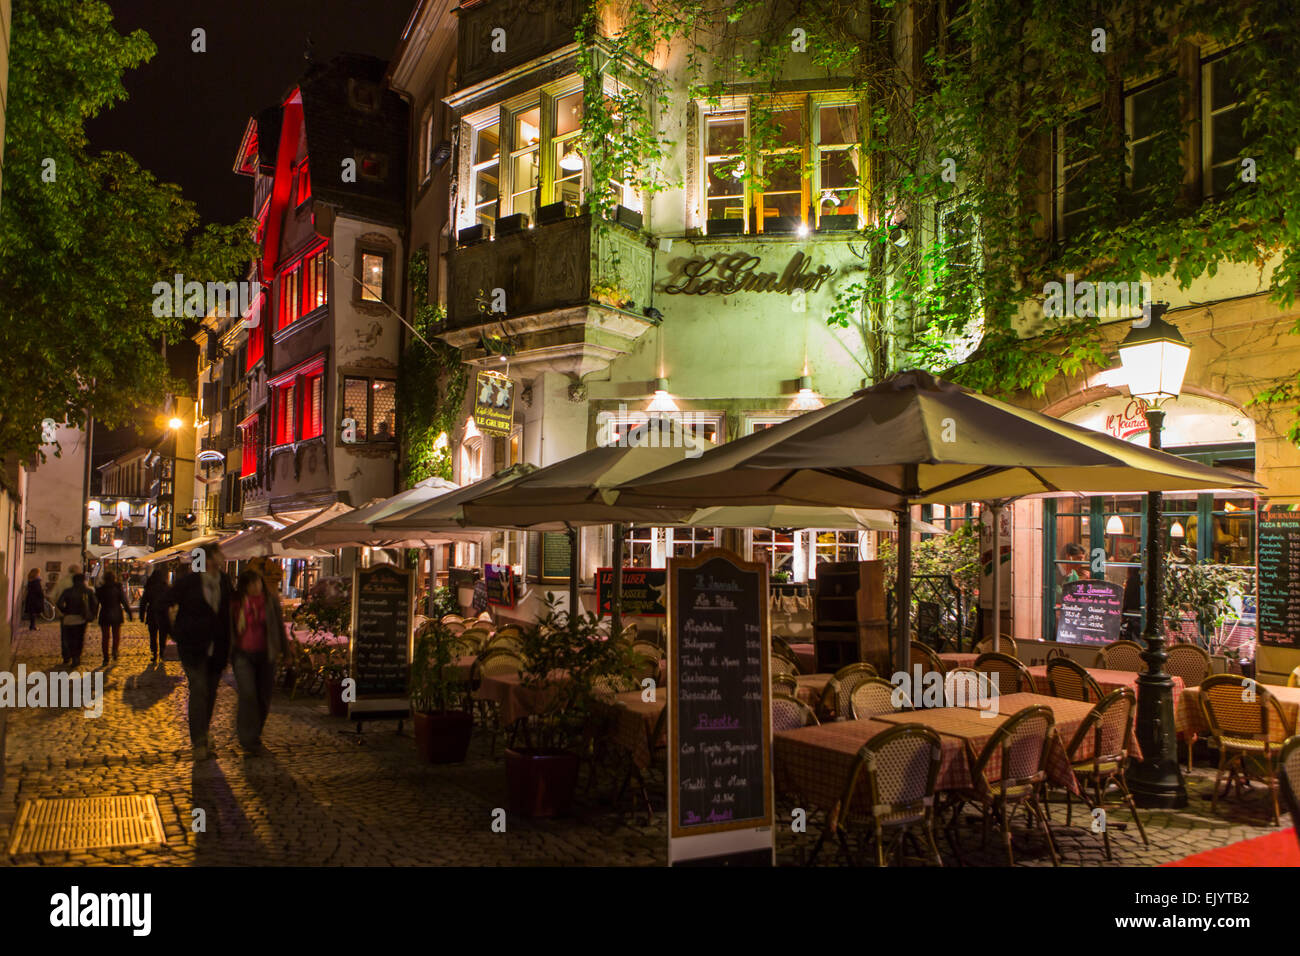 Street restaurant cafe tables and chairs at night, Strasbourg, France Stock Photo